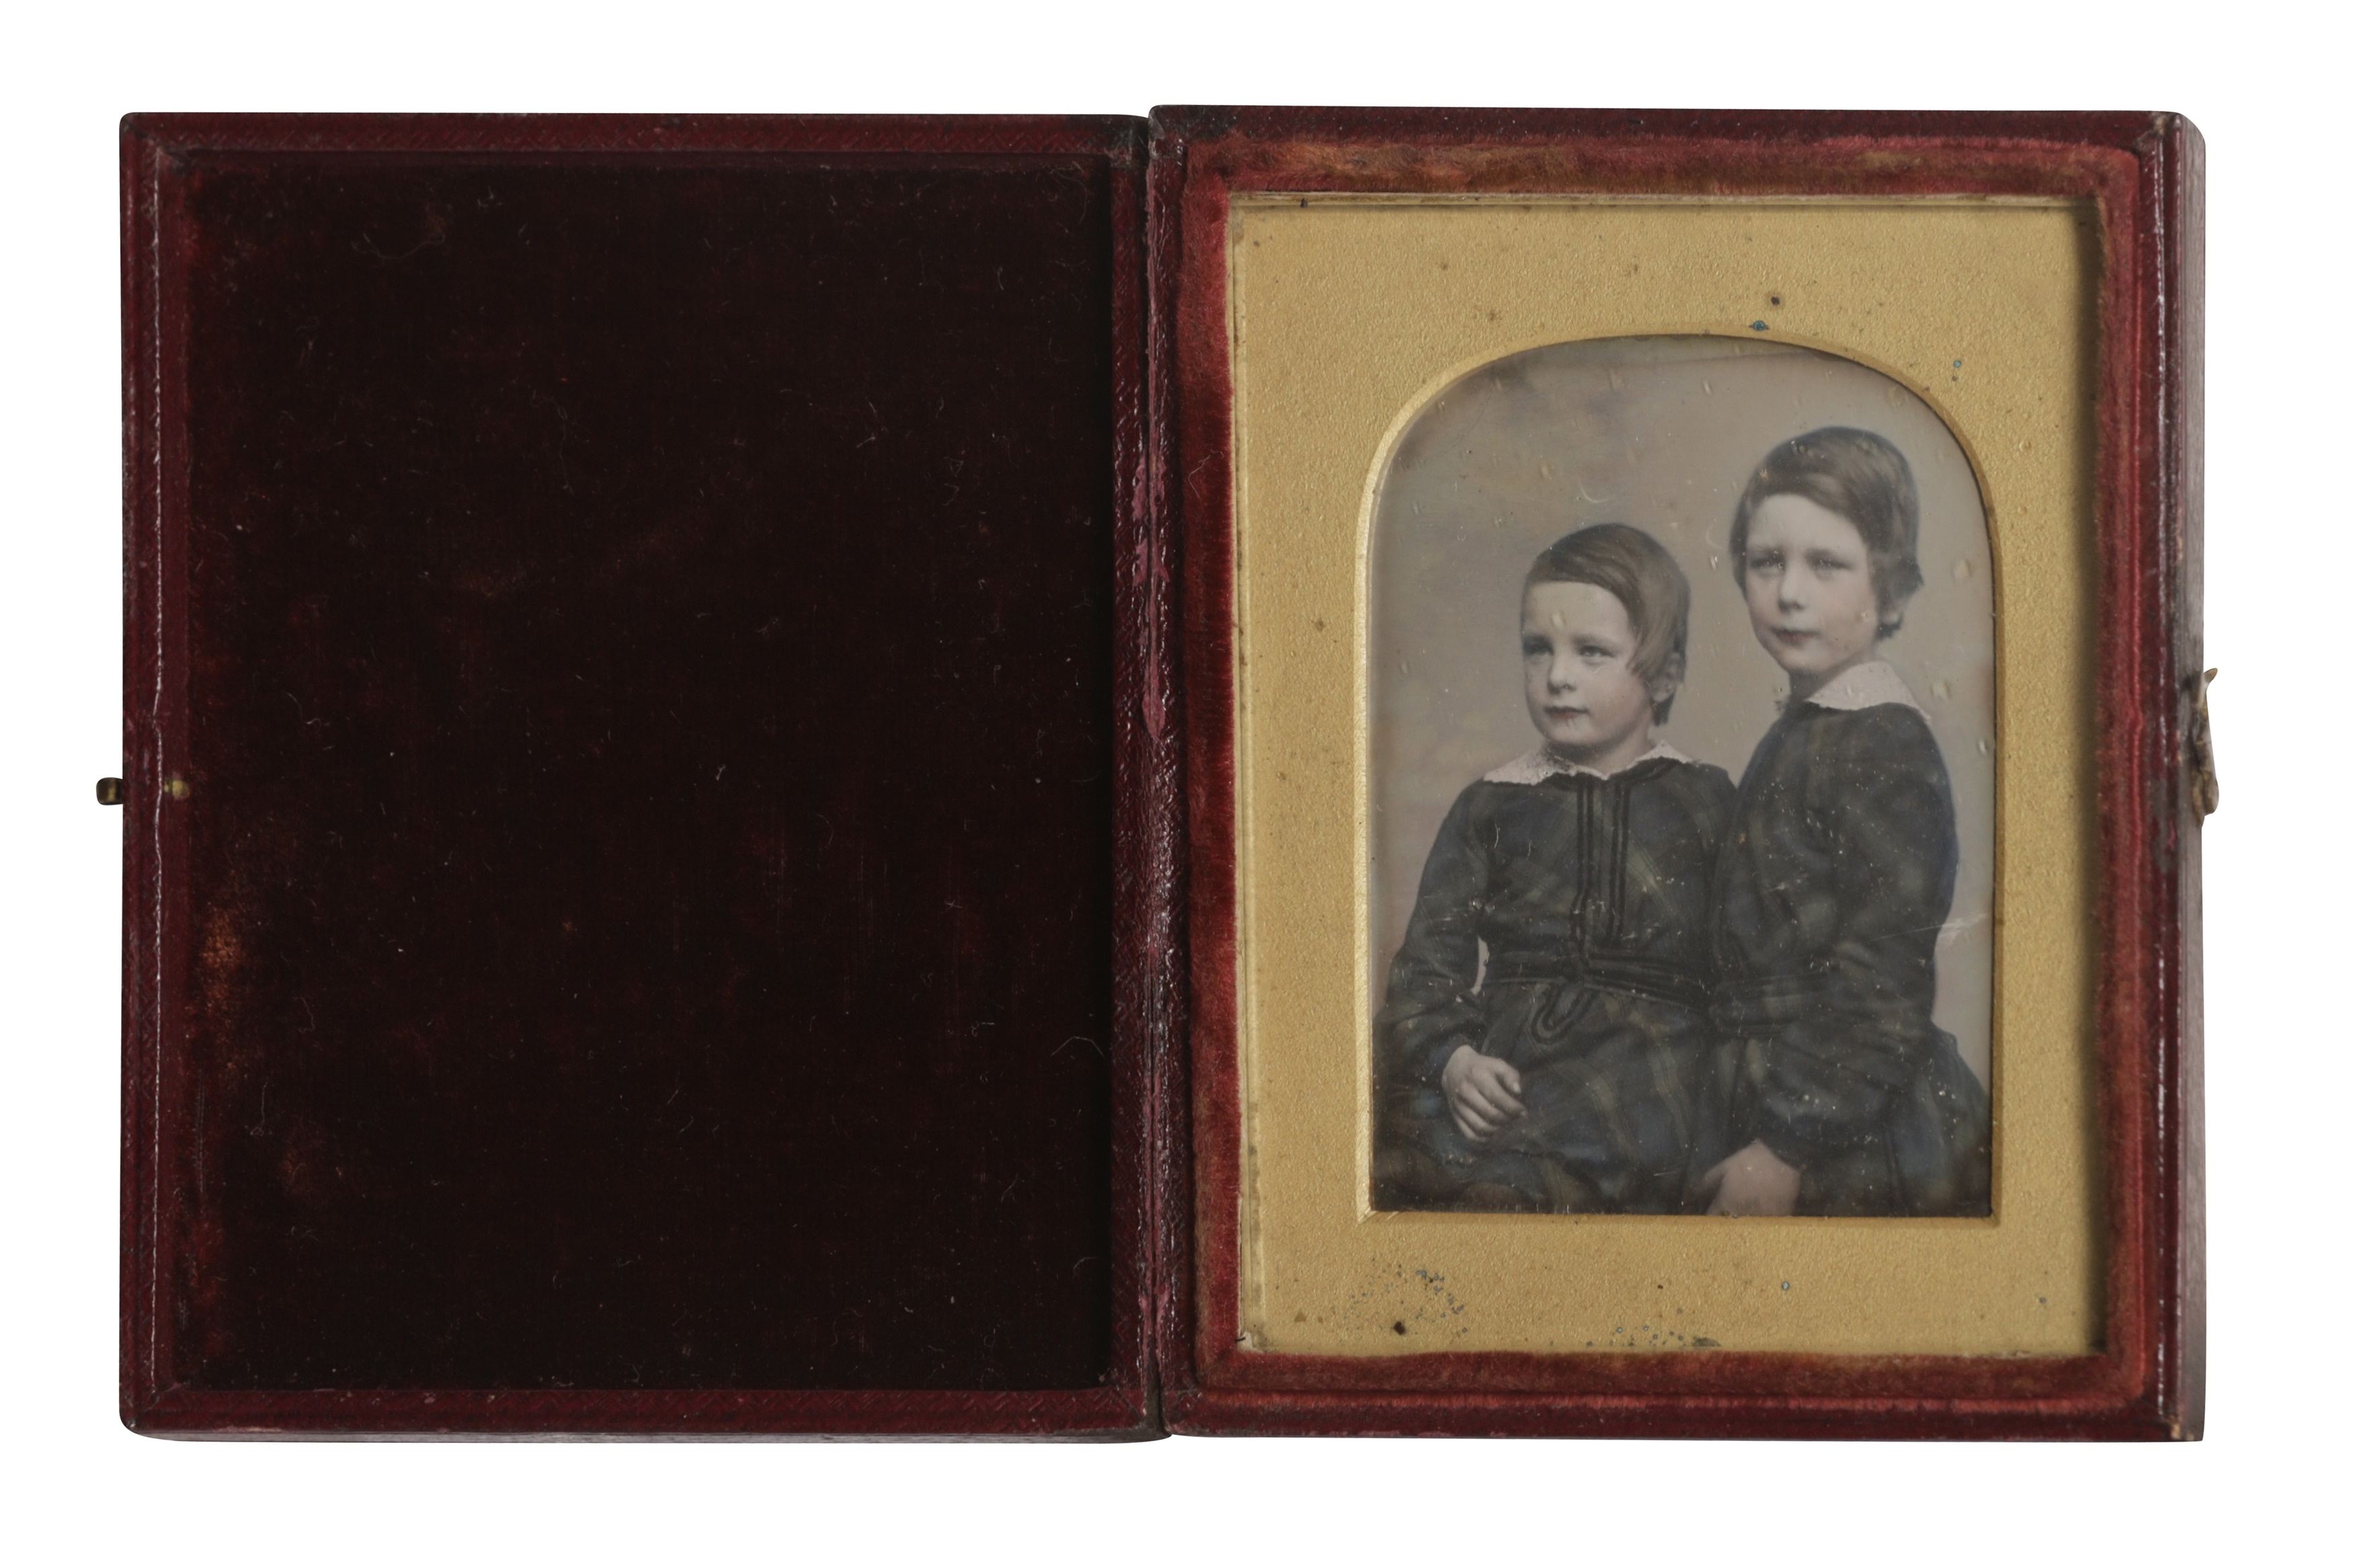 Artwork by William Edward Kilburn, A SELECTION OF DAGUERREOTYPE PORTRAITS, Made of ink on piece of paper